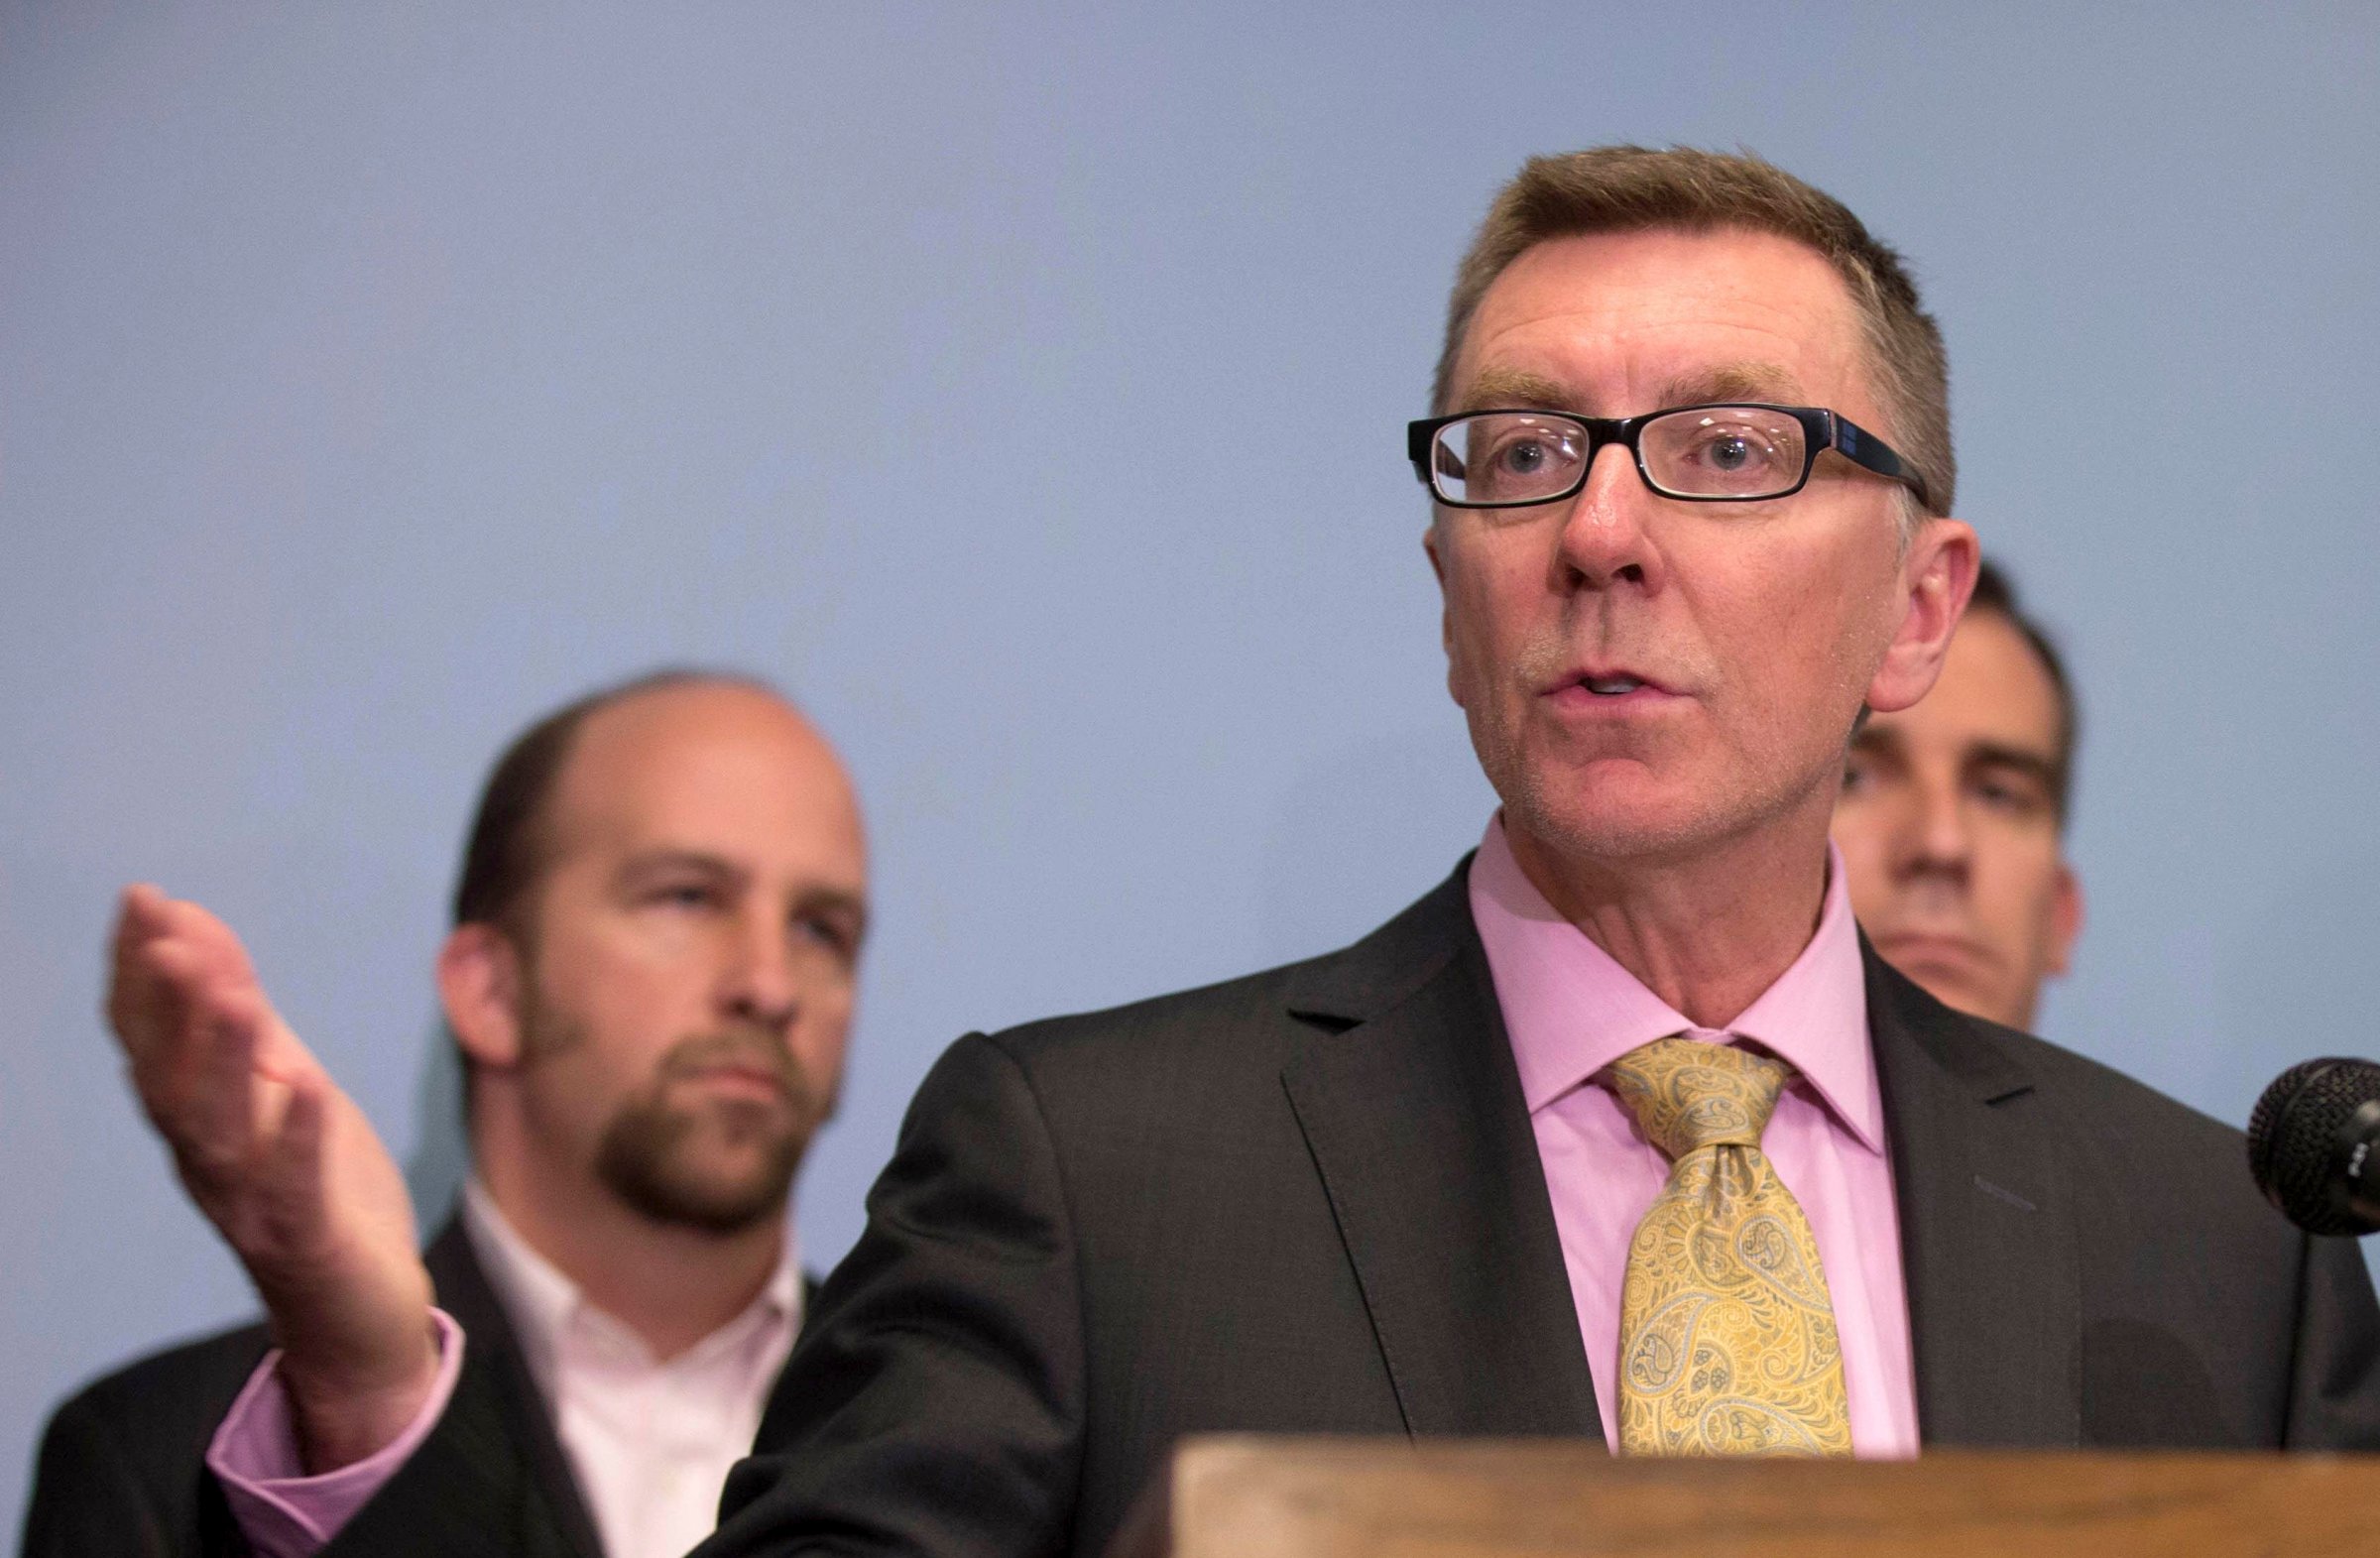 Los Angeles Unified School District Superintendent John Deasy speaks at a news conference in Los Angeles on April 11, 2014.